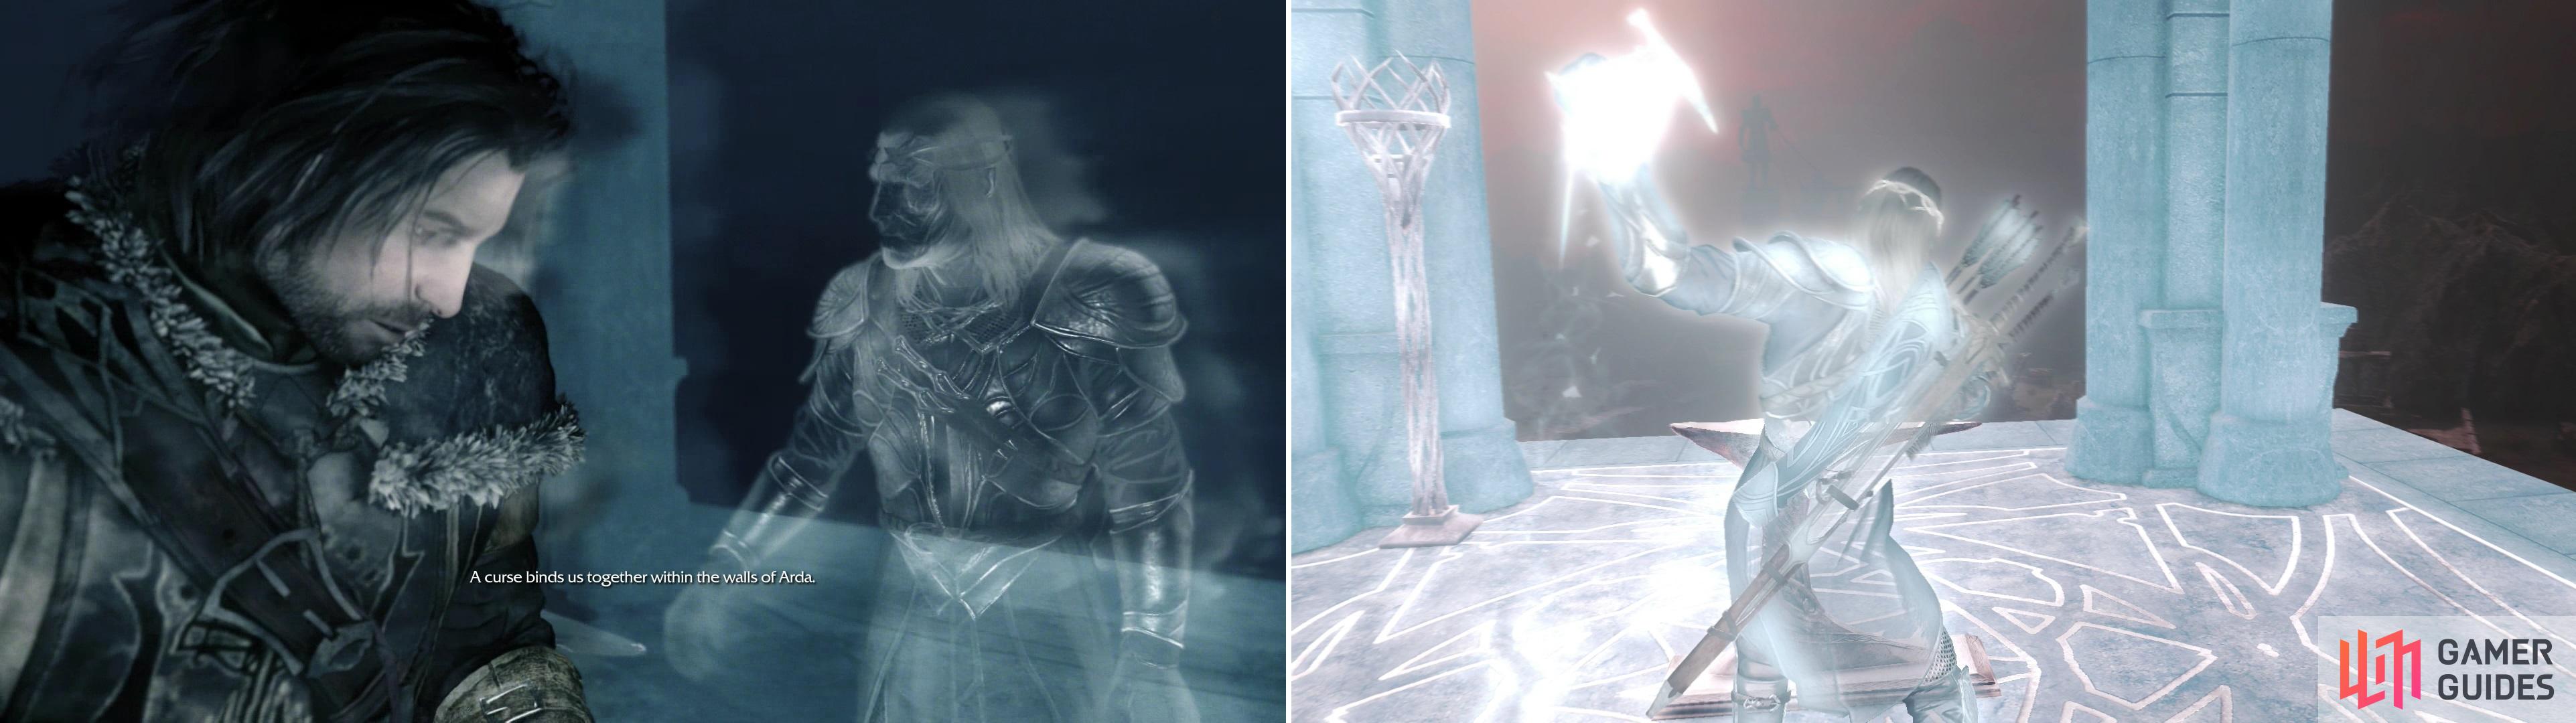 After the ritual, you'll find yourself lost in Mordor, and bound to an Elven Wraith (left). Reforge the Forge Tower to gain information about the surrounding area (right).